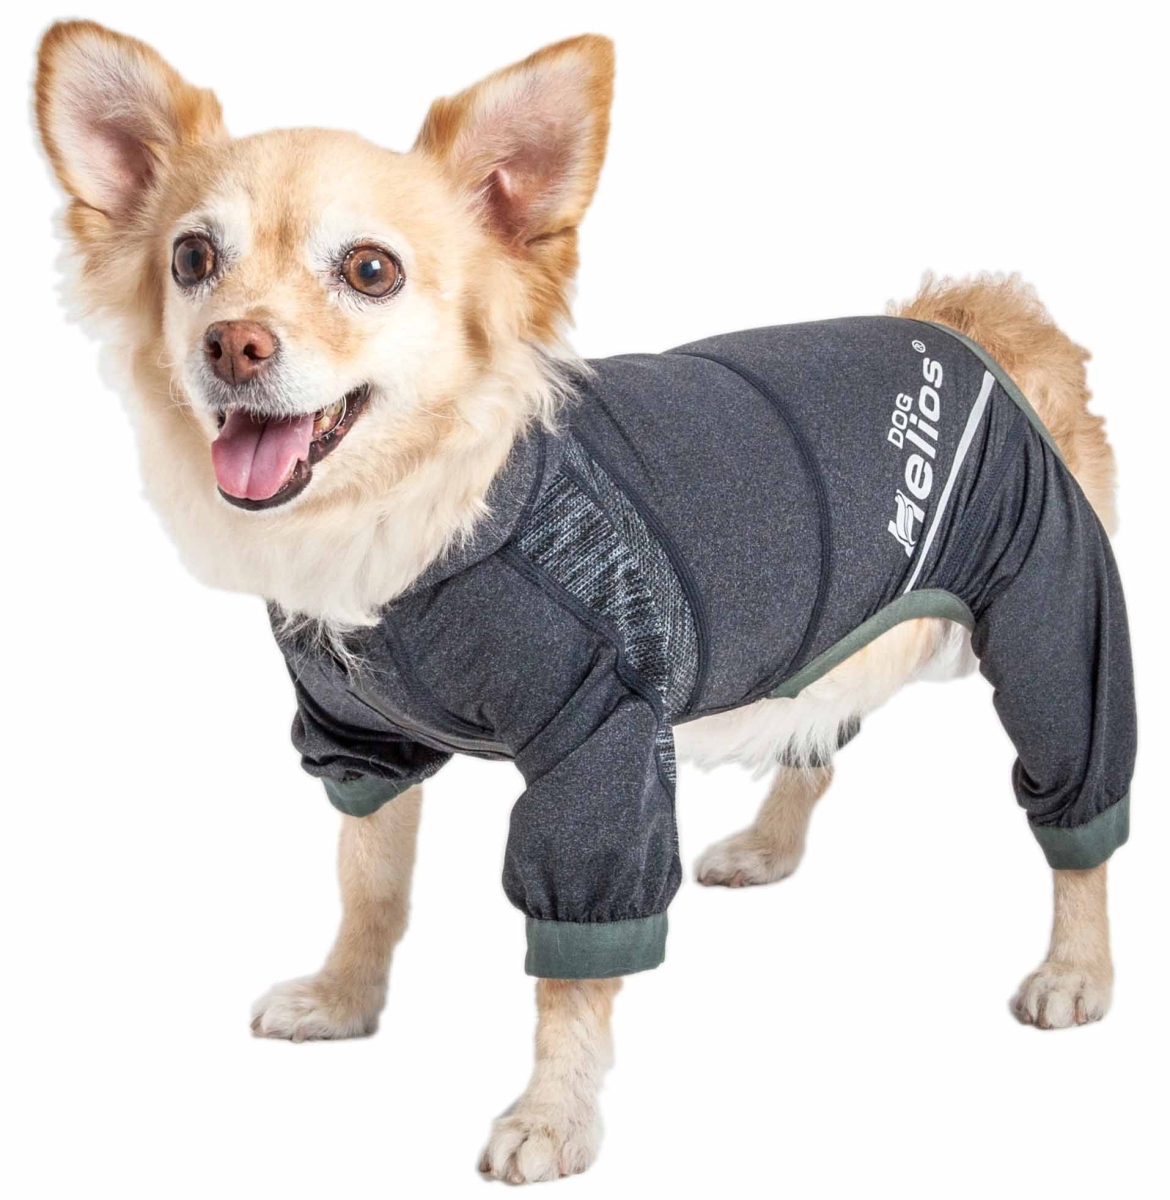 Yghl7bklg Namastail 4-way Stretch Breathable Full Bodied Performance Yoga Dog Hoodie Tracksuit - Charcoal Black, Large